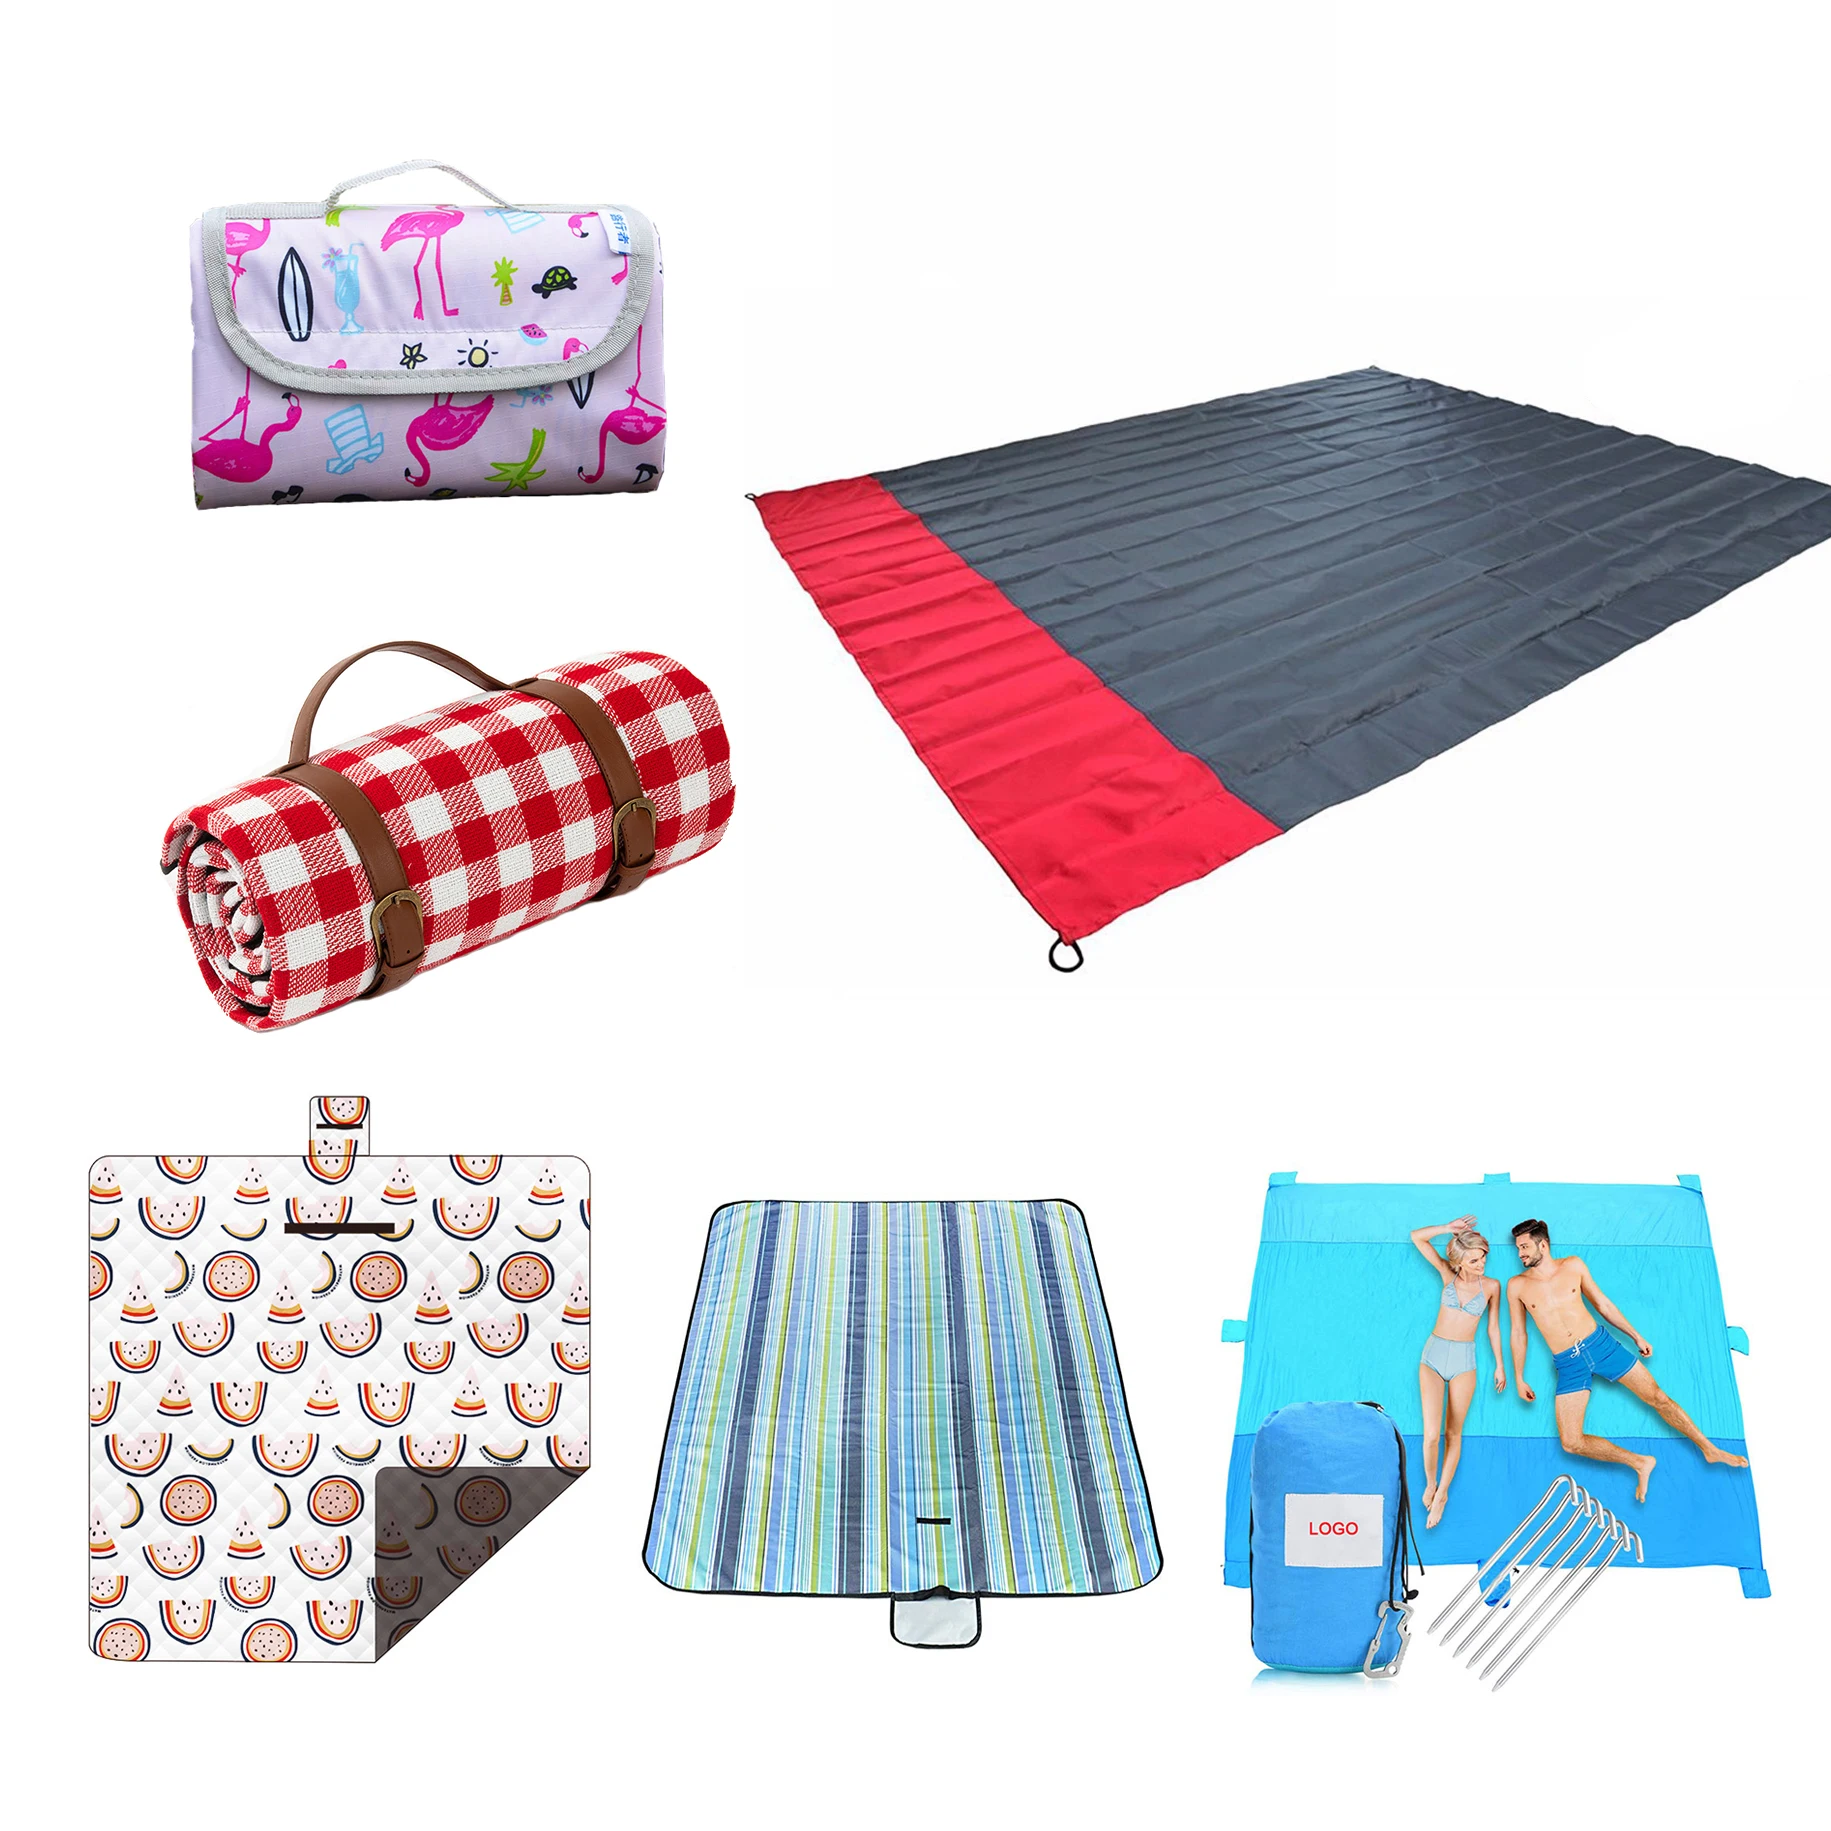 

RPET Material Outdoor portable beach blanket 210t nylon parachute sand proof camping waterproof blanket picnic beach blanket mat, As color card,customized